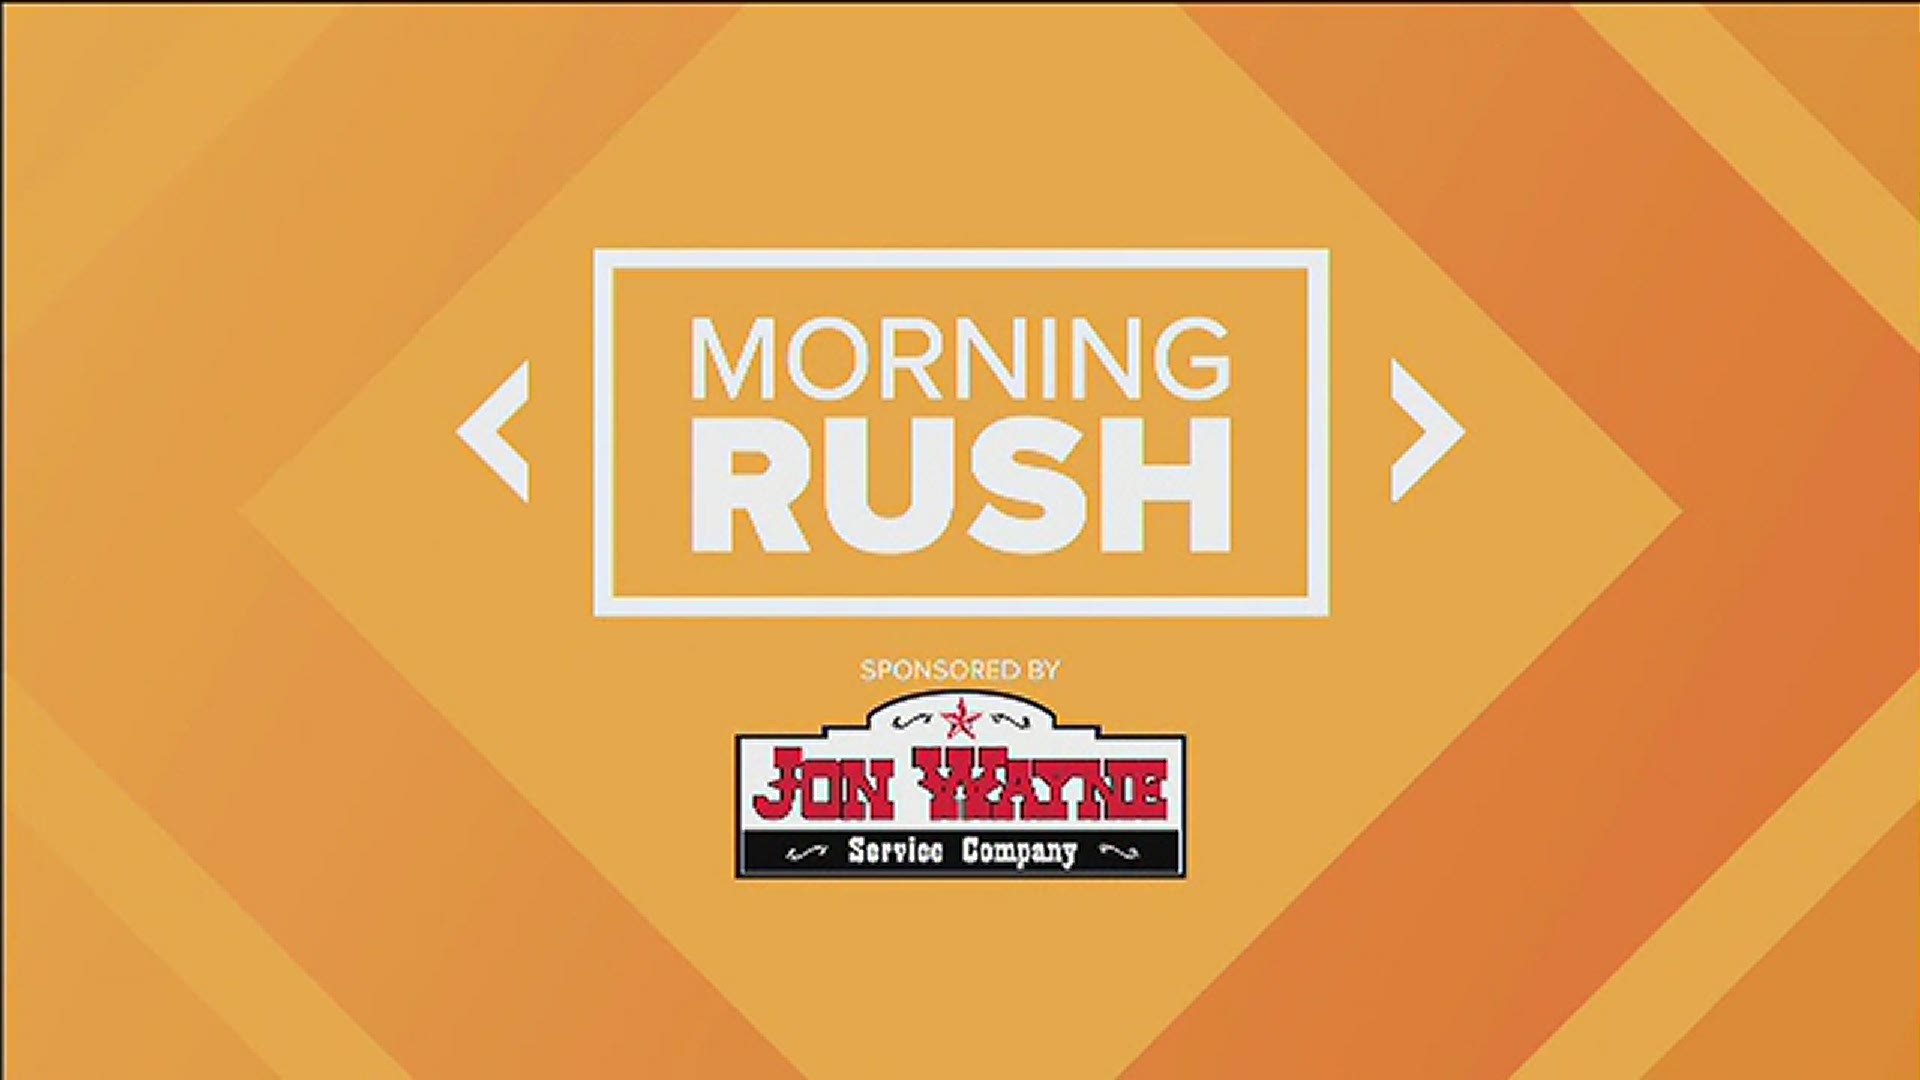 We're getting you caught up on everything you need to know in today's Morning Rush.